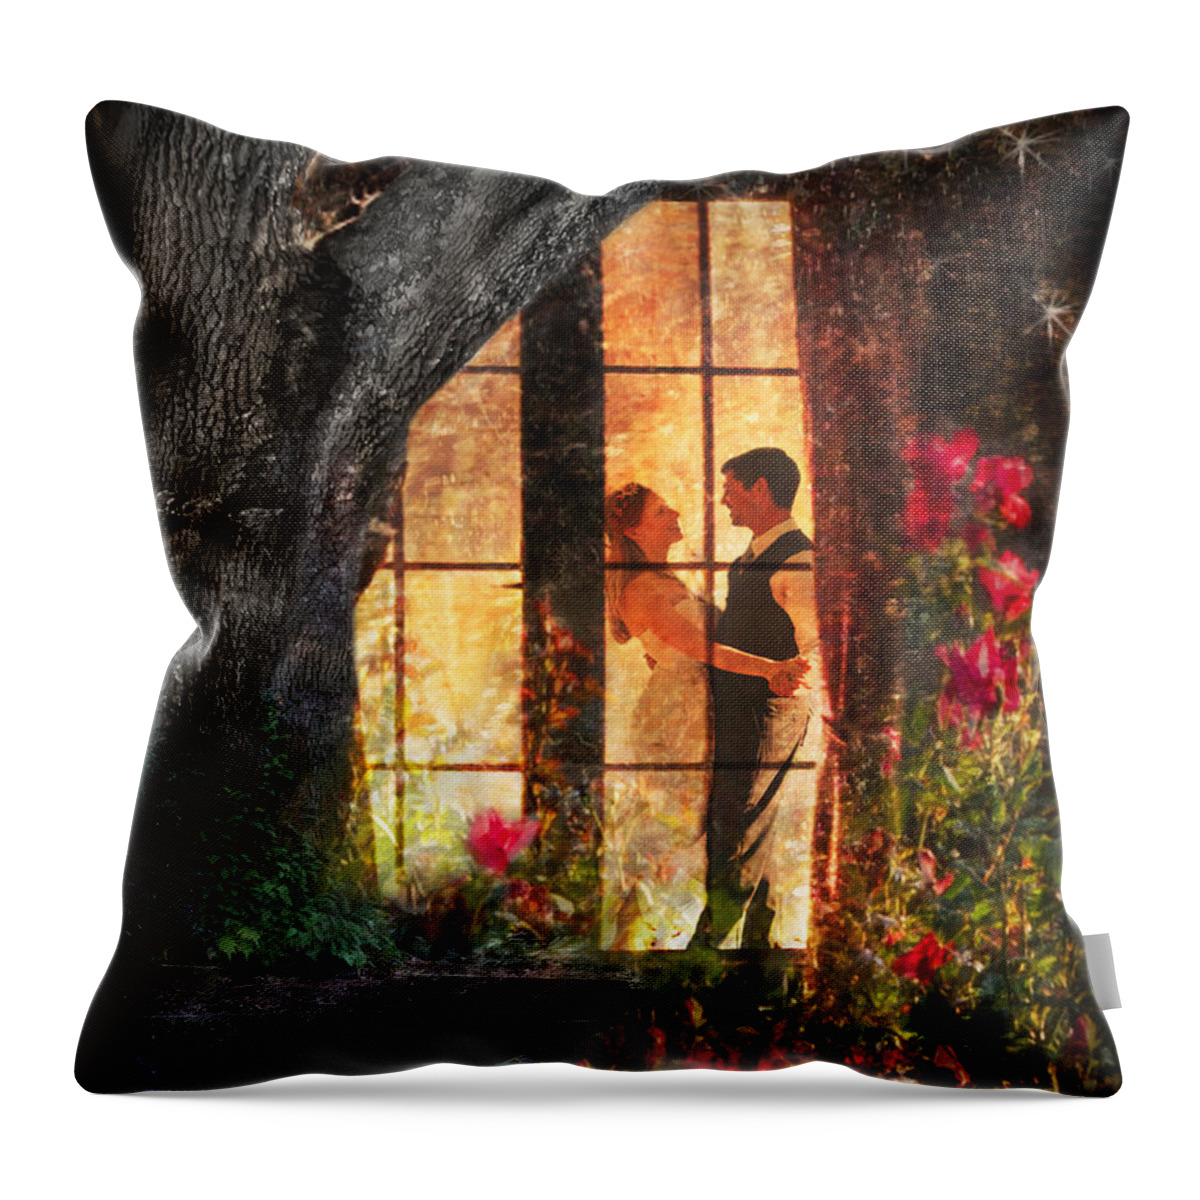 Dancers Throw Pillow featuring the photograph Dancers by Shara Abel